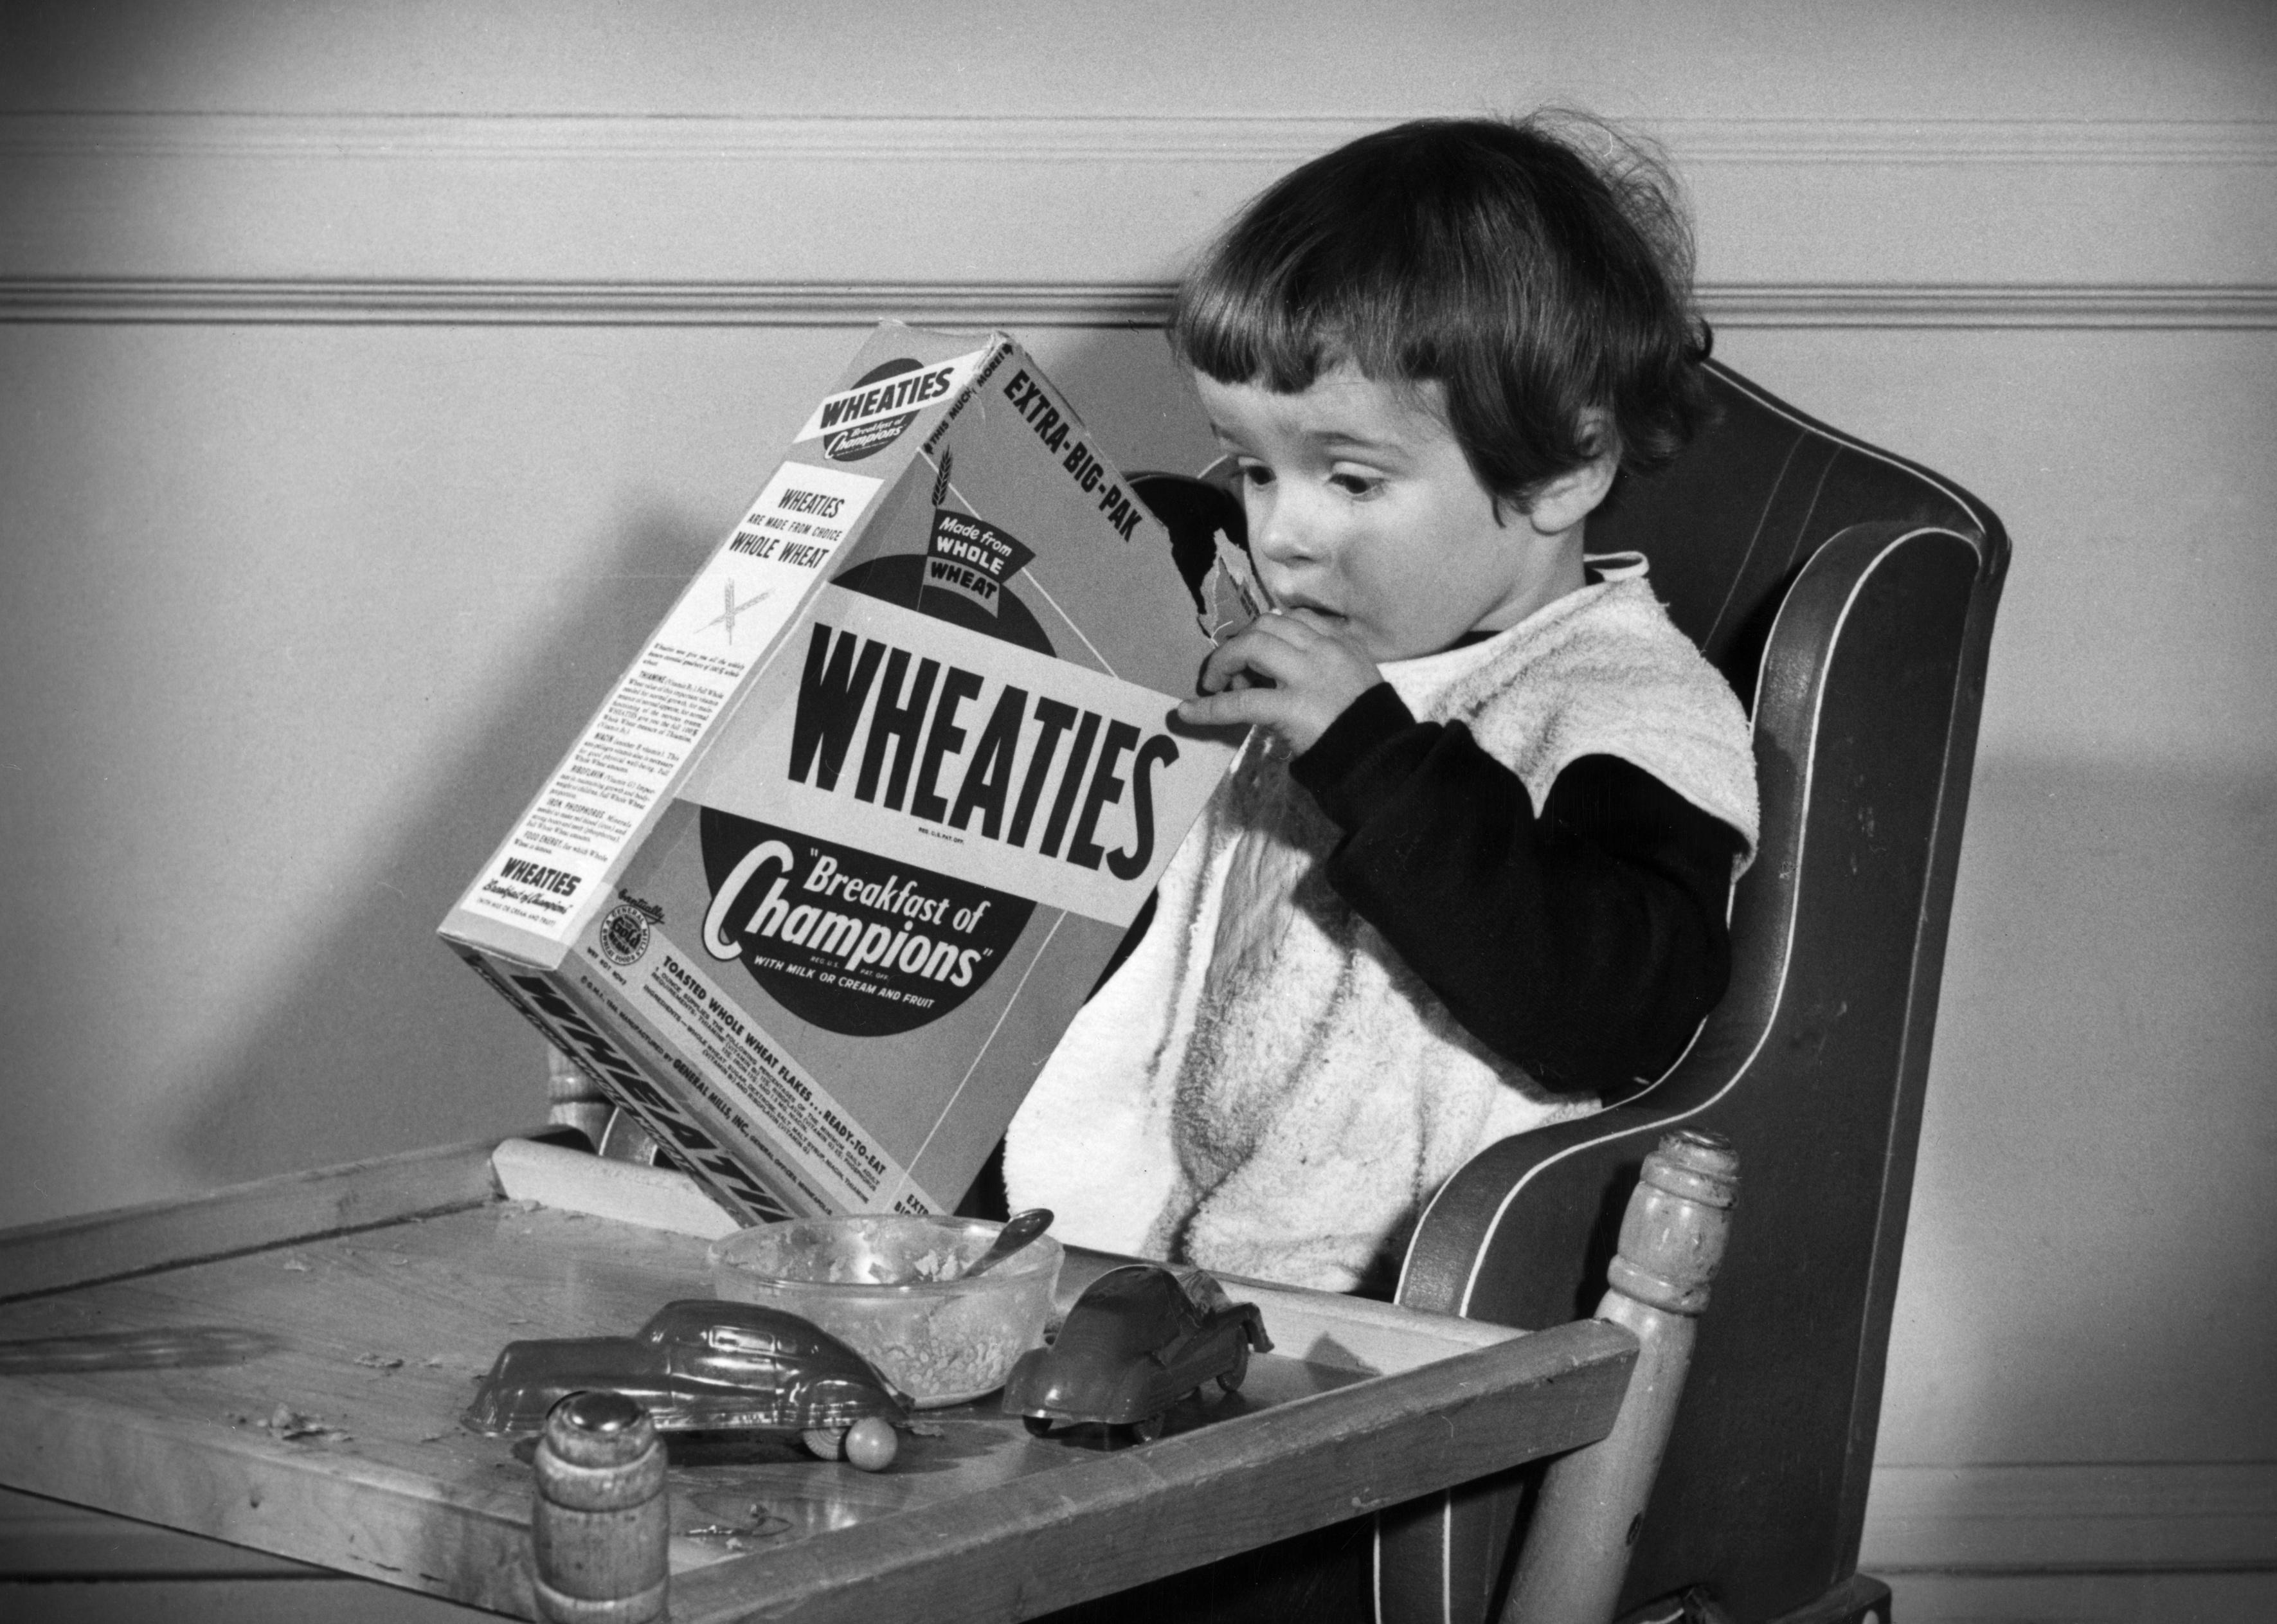 A young child opening a box of Wheaties.